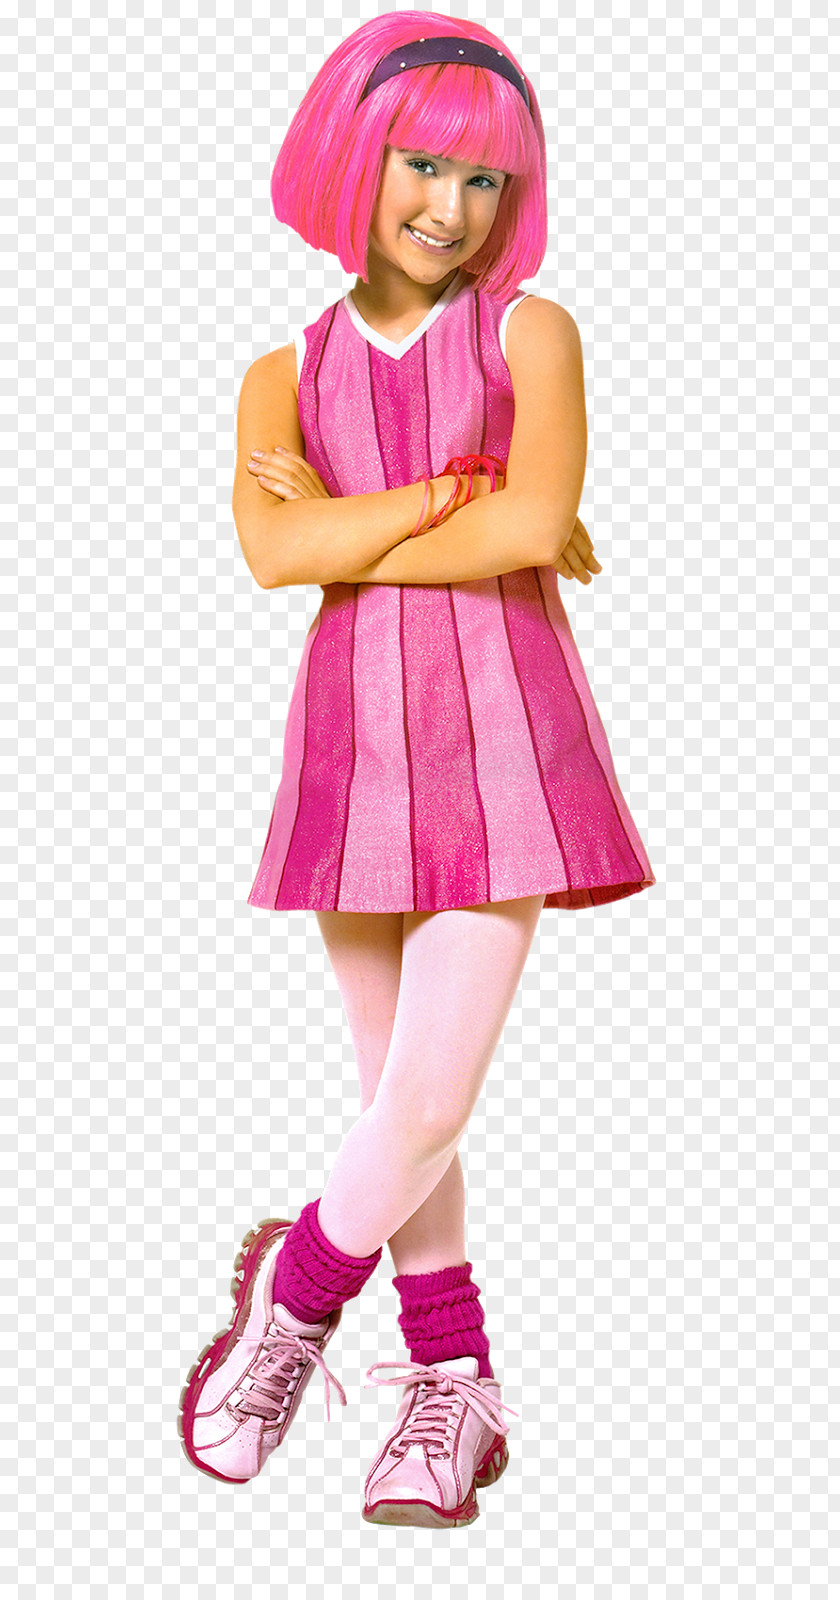 Lazytown Chloe Lang Stephanie LazyTown Children's Television Series Show PNG